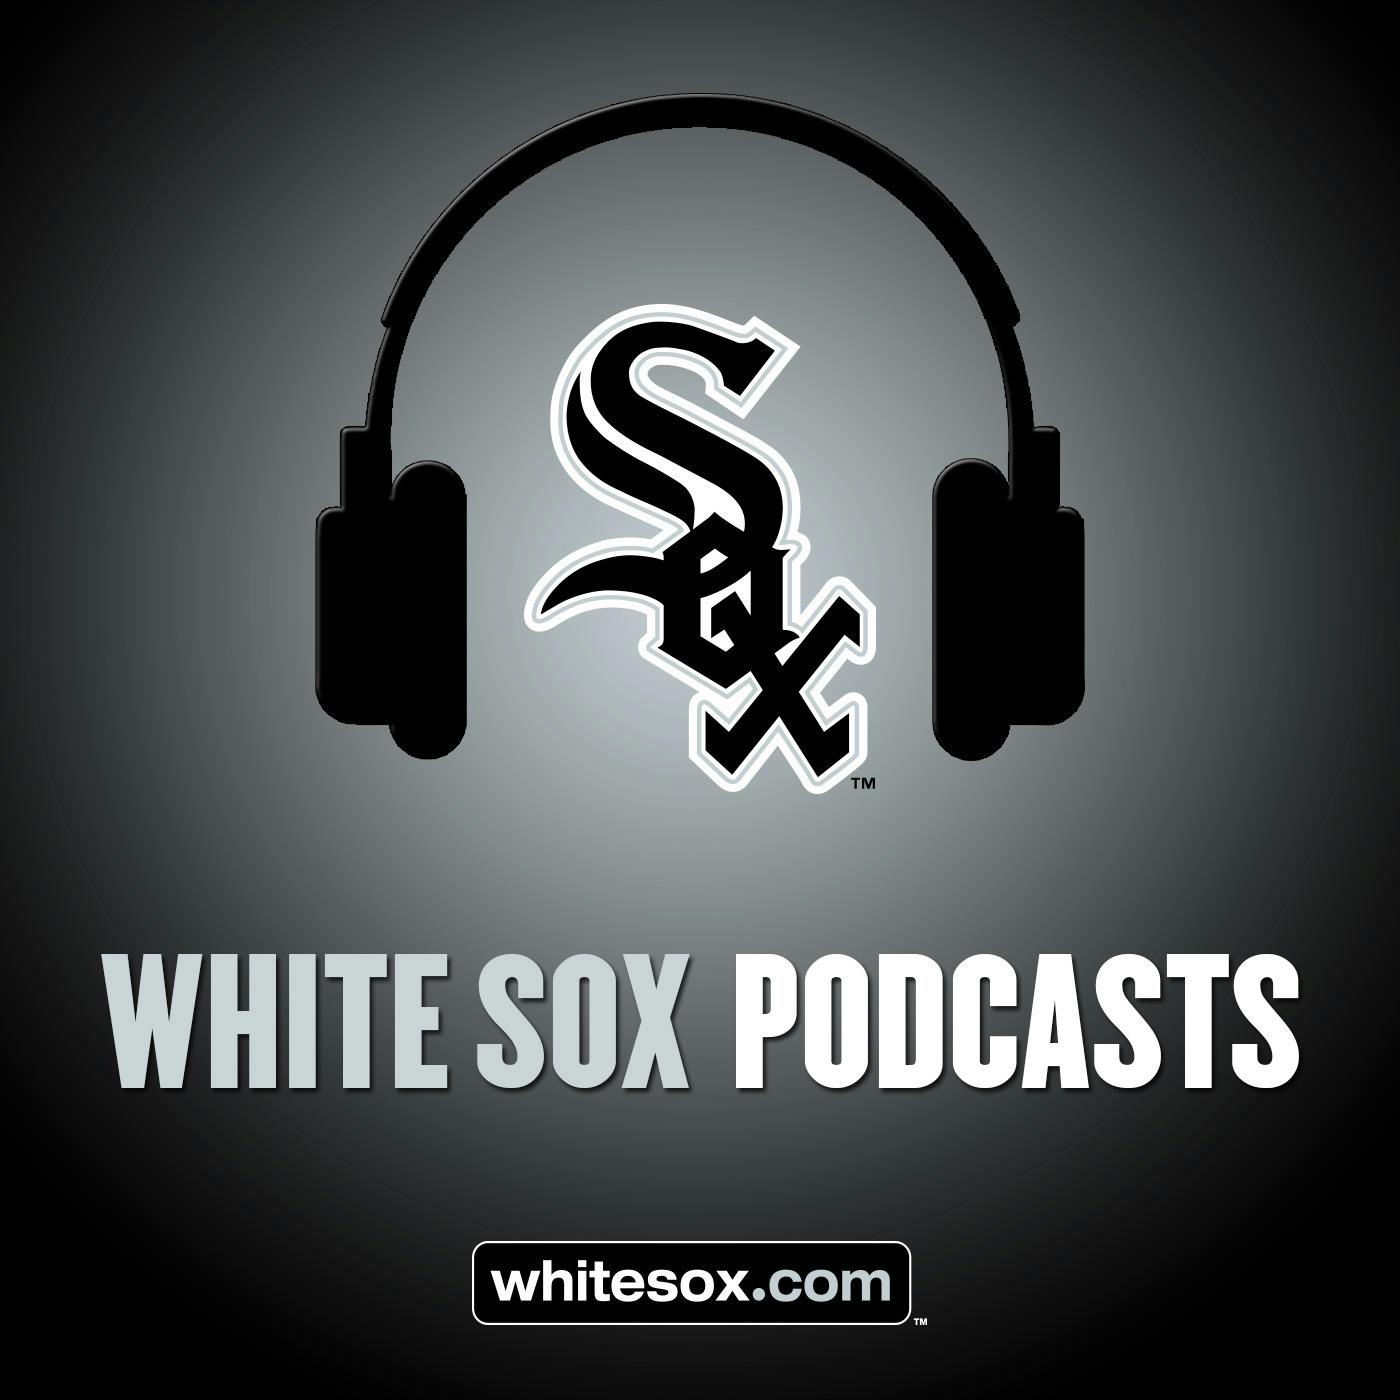 8/24/19: White Sox Weekly